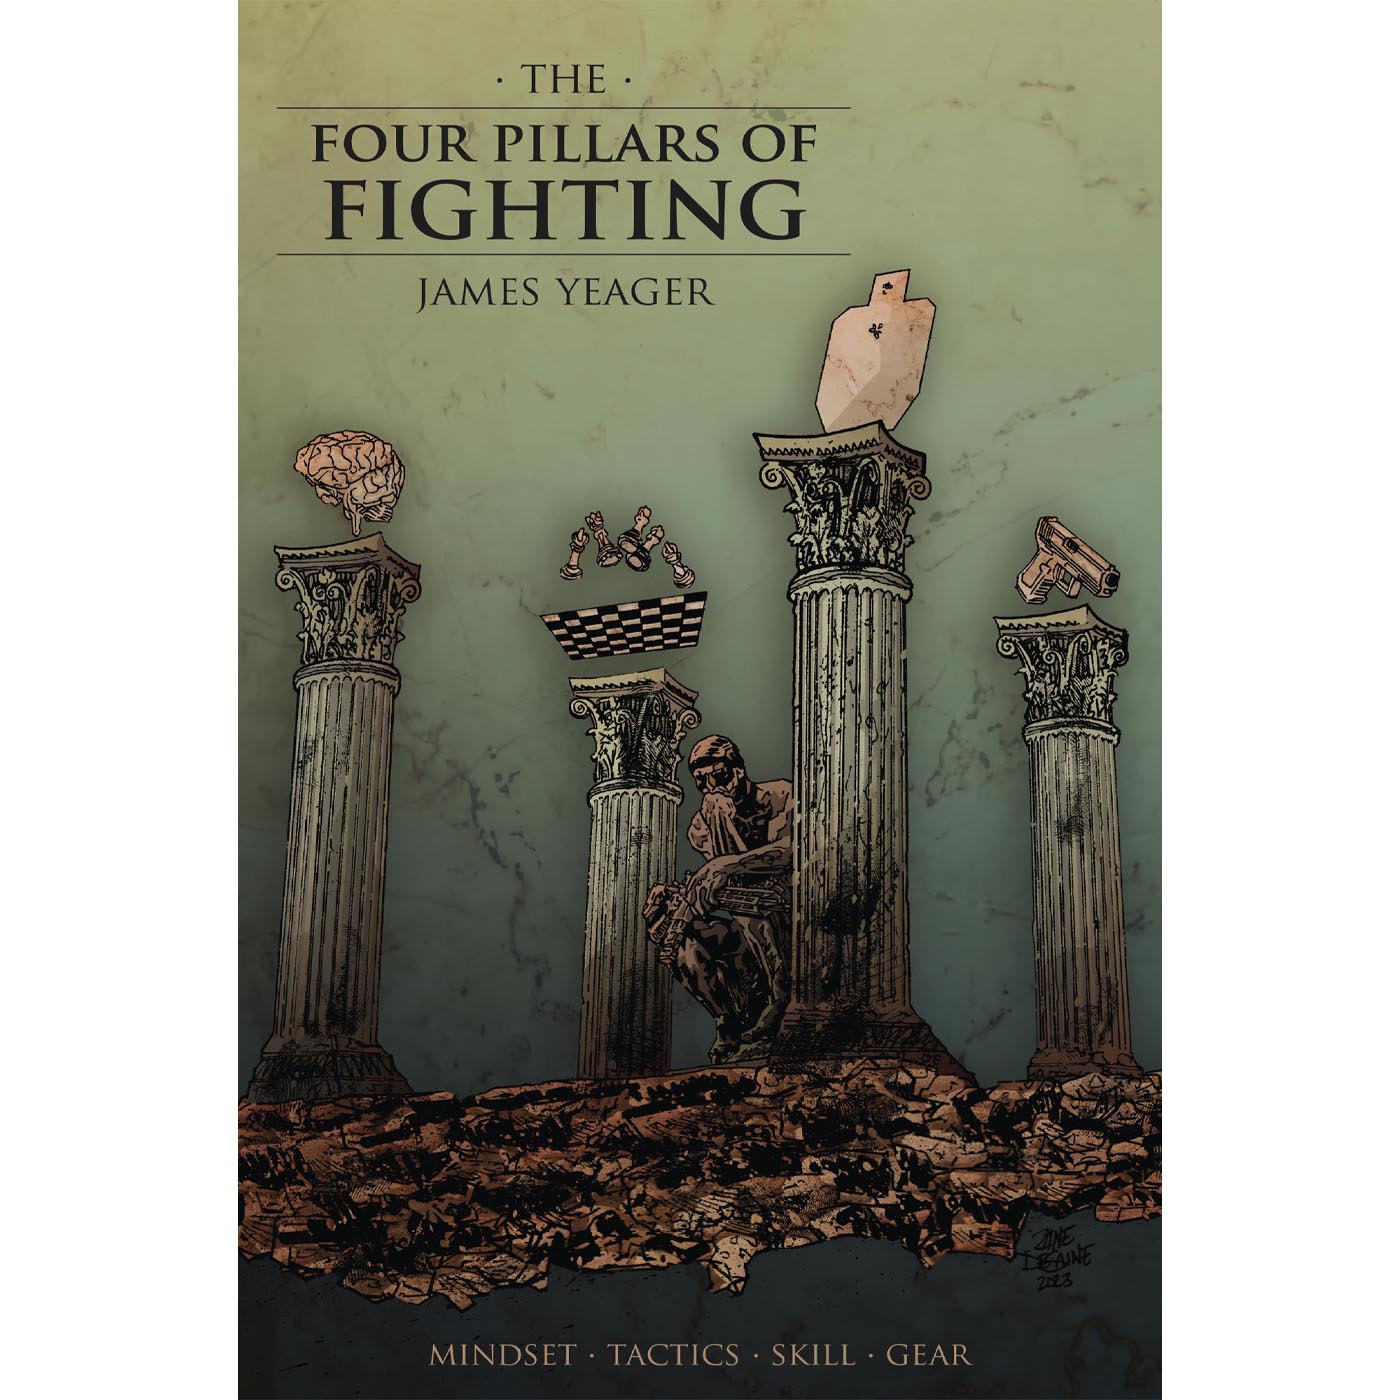 The Four Pillars of Fighting - by James Yeager